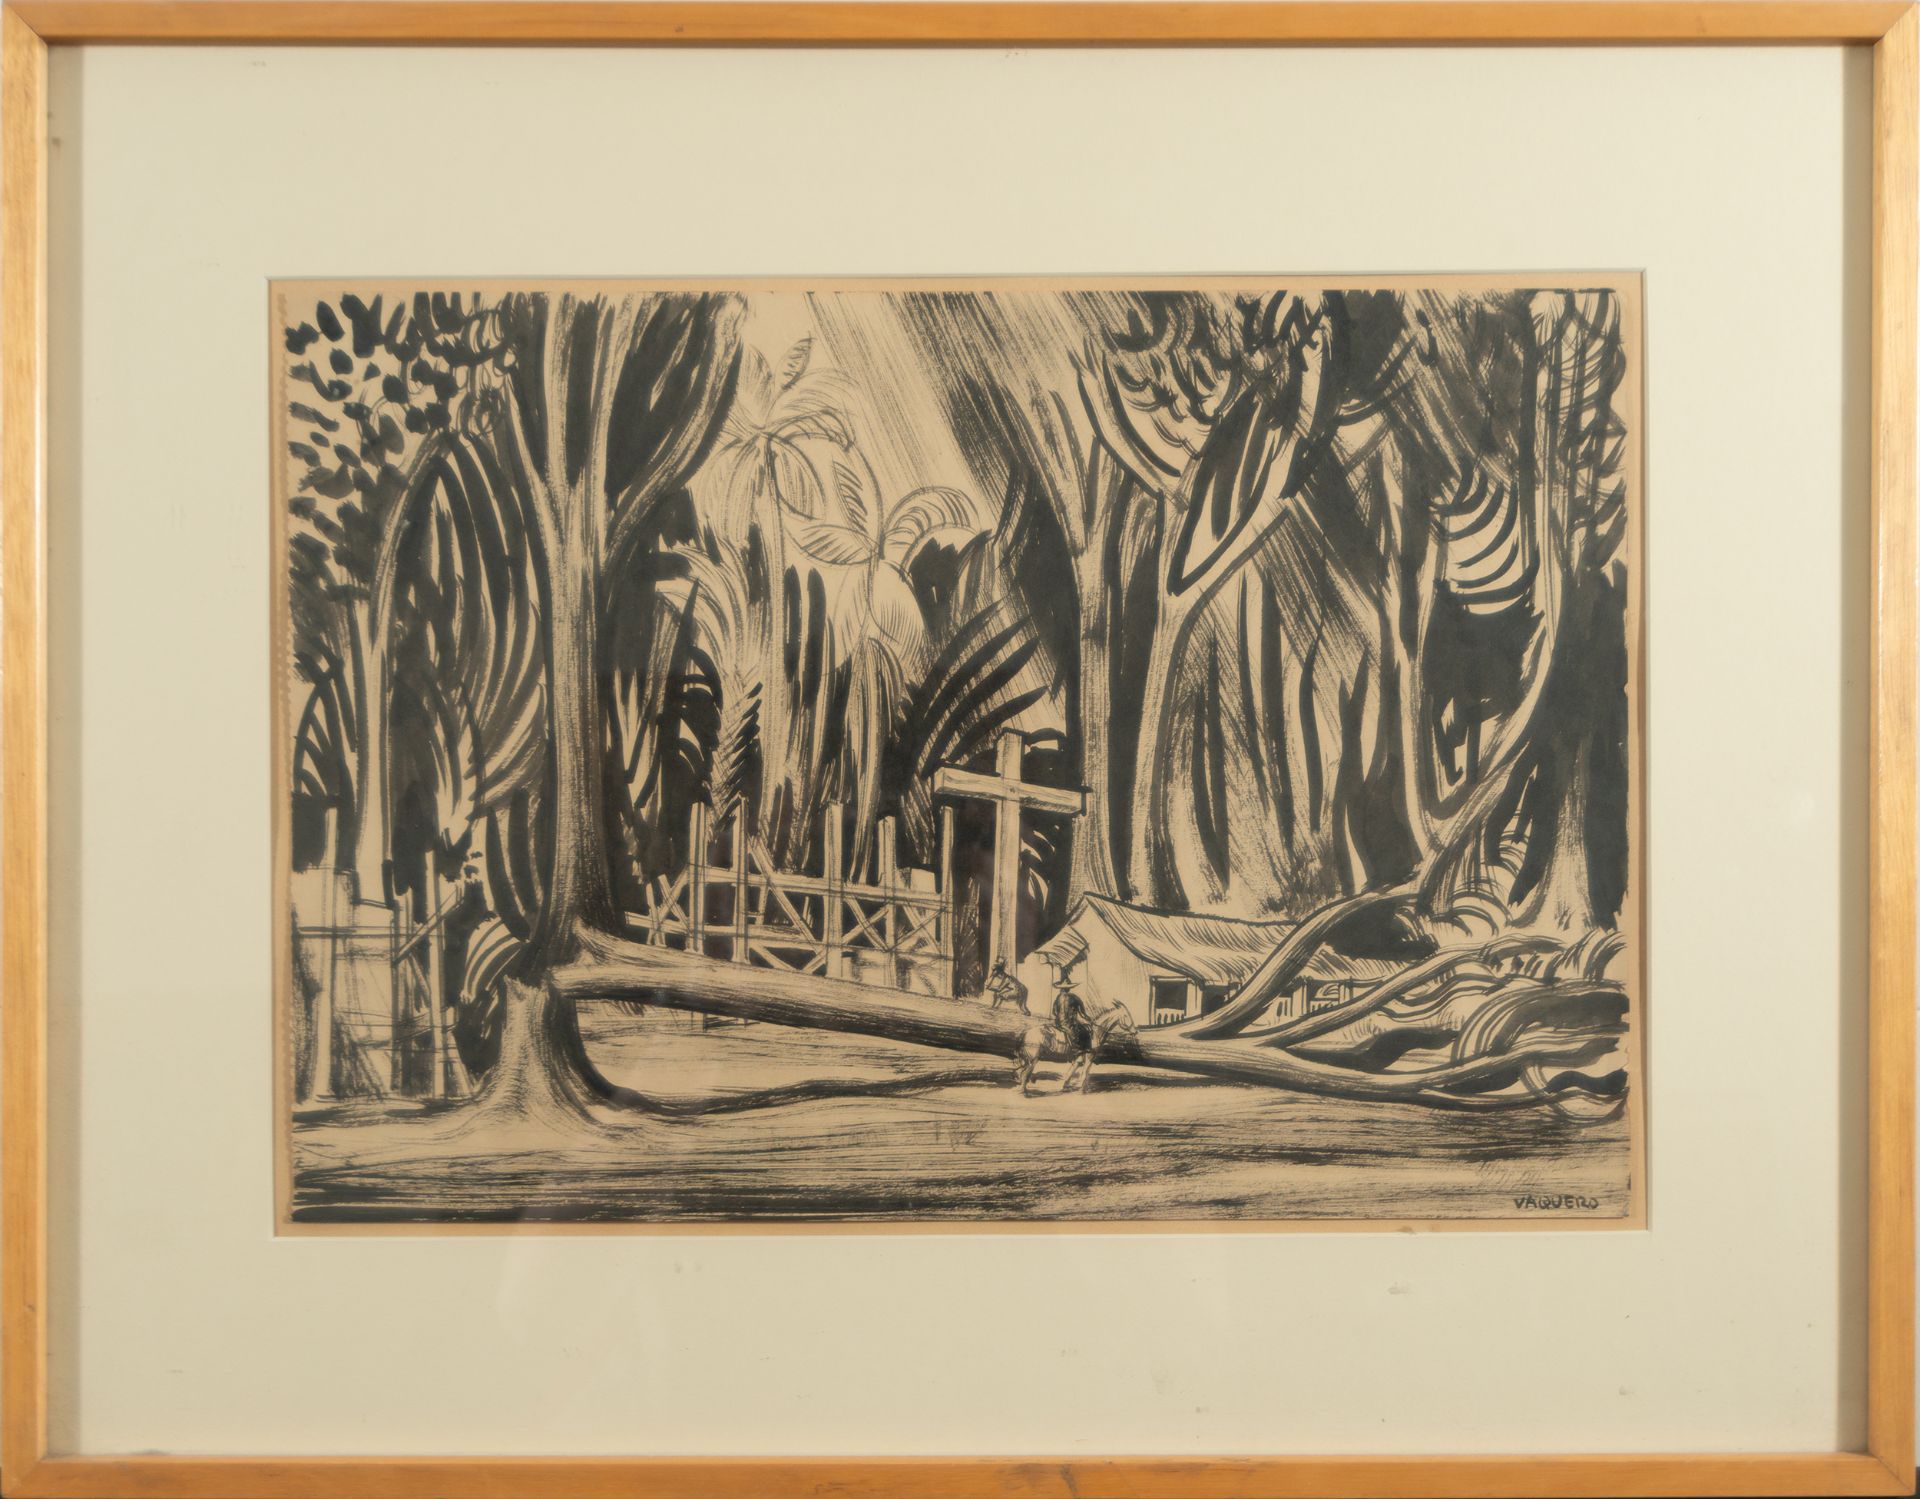 "Interior of a Forest", Drawing on Paper, signed Vaquero (Galician painter), Spanish school of the 2